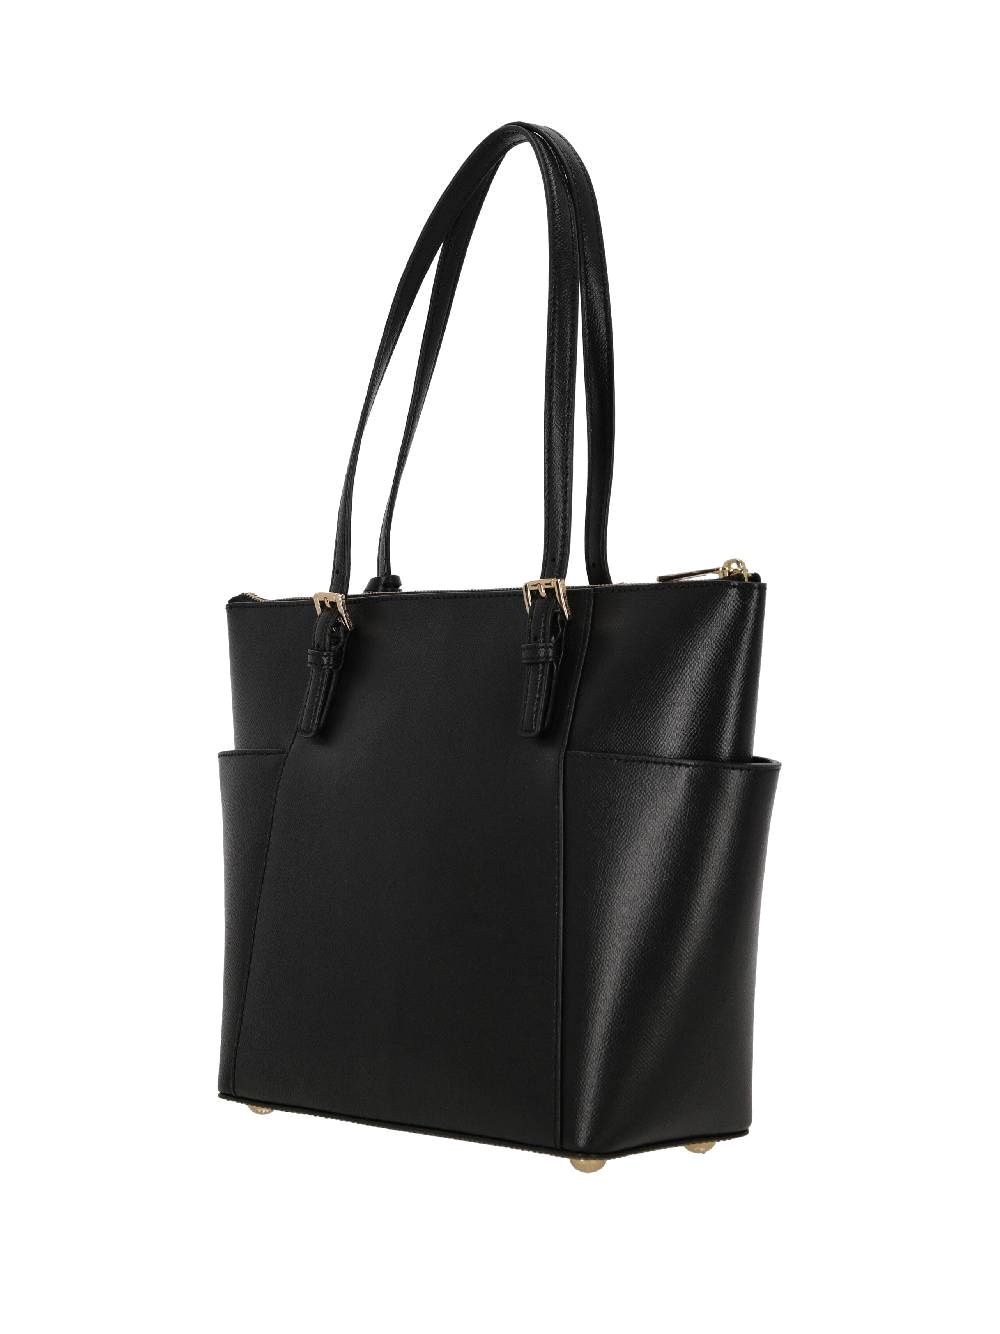 Marilyn leather tote bag.